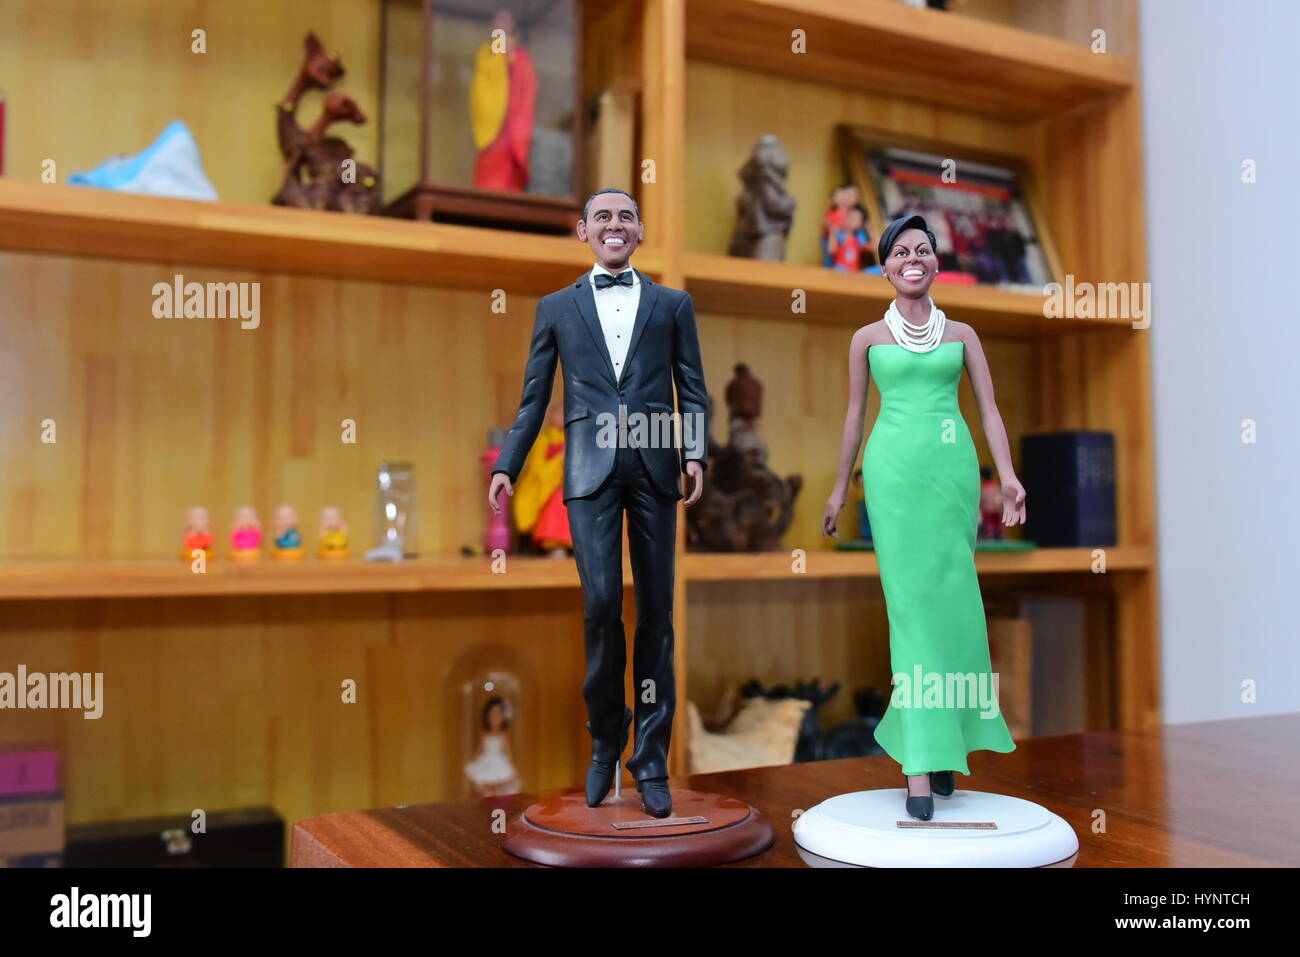 Zhengzhou, Zhengzhou, China. 5th Apr, 2017. Zhengzhou, CHINA-April 5 2017: (EDITORIAL USE ONLY. CHINA OUT) The folk artist Jia Guanghui shows his handmade clay figurine of Chinese leader Xi Jinping's wife Peng Liyuan in Zhengzhou, central China's Henan Province, April 5th, 2017. Jia has been making clay figurines for twenty years, creating vivid figurines of celebrities including Jackie Chan, Barack and Michelle Obama. Jia also made figurines of characters in Chinese classic literature works including Dream of the Red Chamber and Heroes of the Marshes. (Credit Image: © SIPA Asia via ZUMA Wir Stock Photo